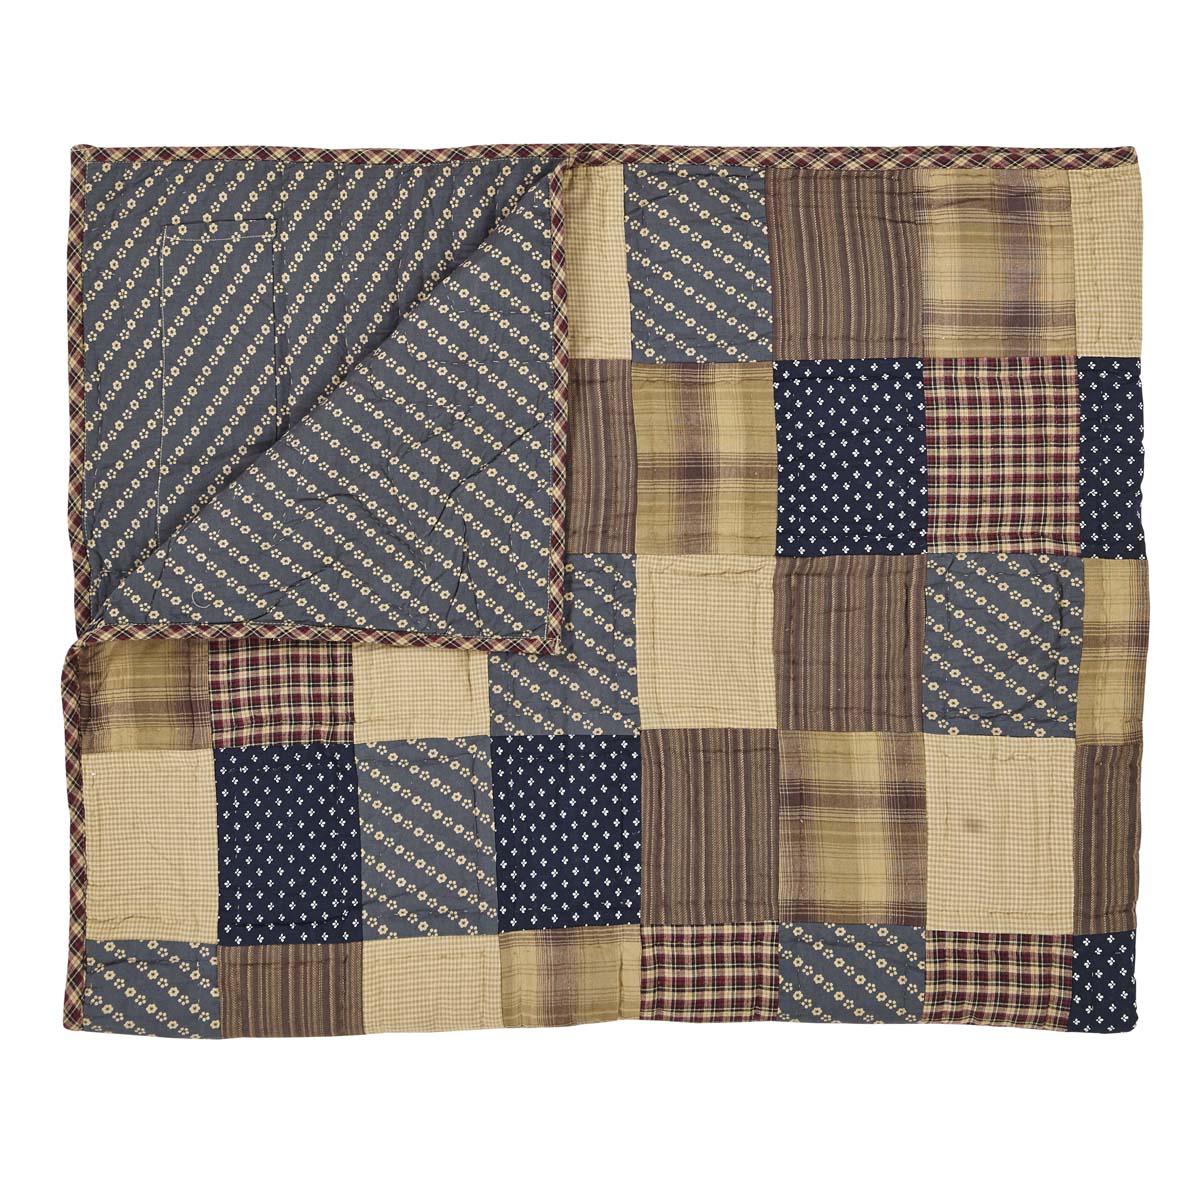 Mayflower Market Patriotic Patch Quilted Throw 60x50 By VHC Brands